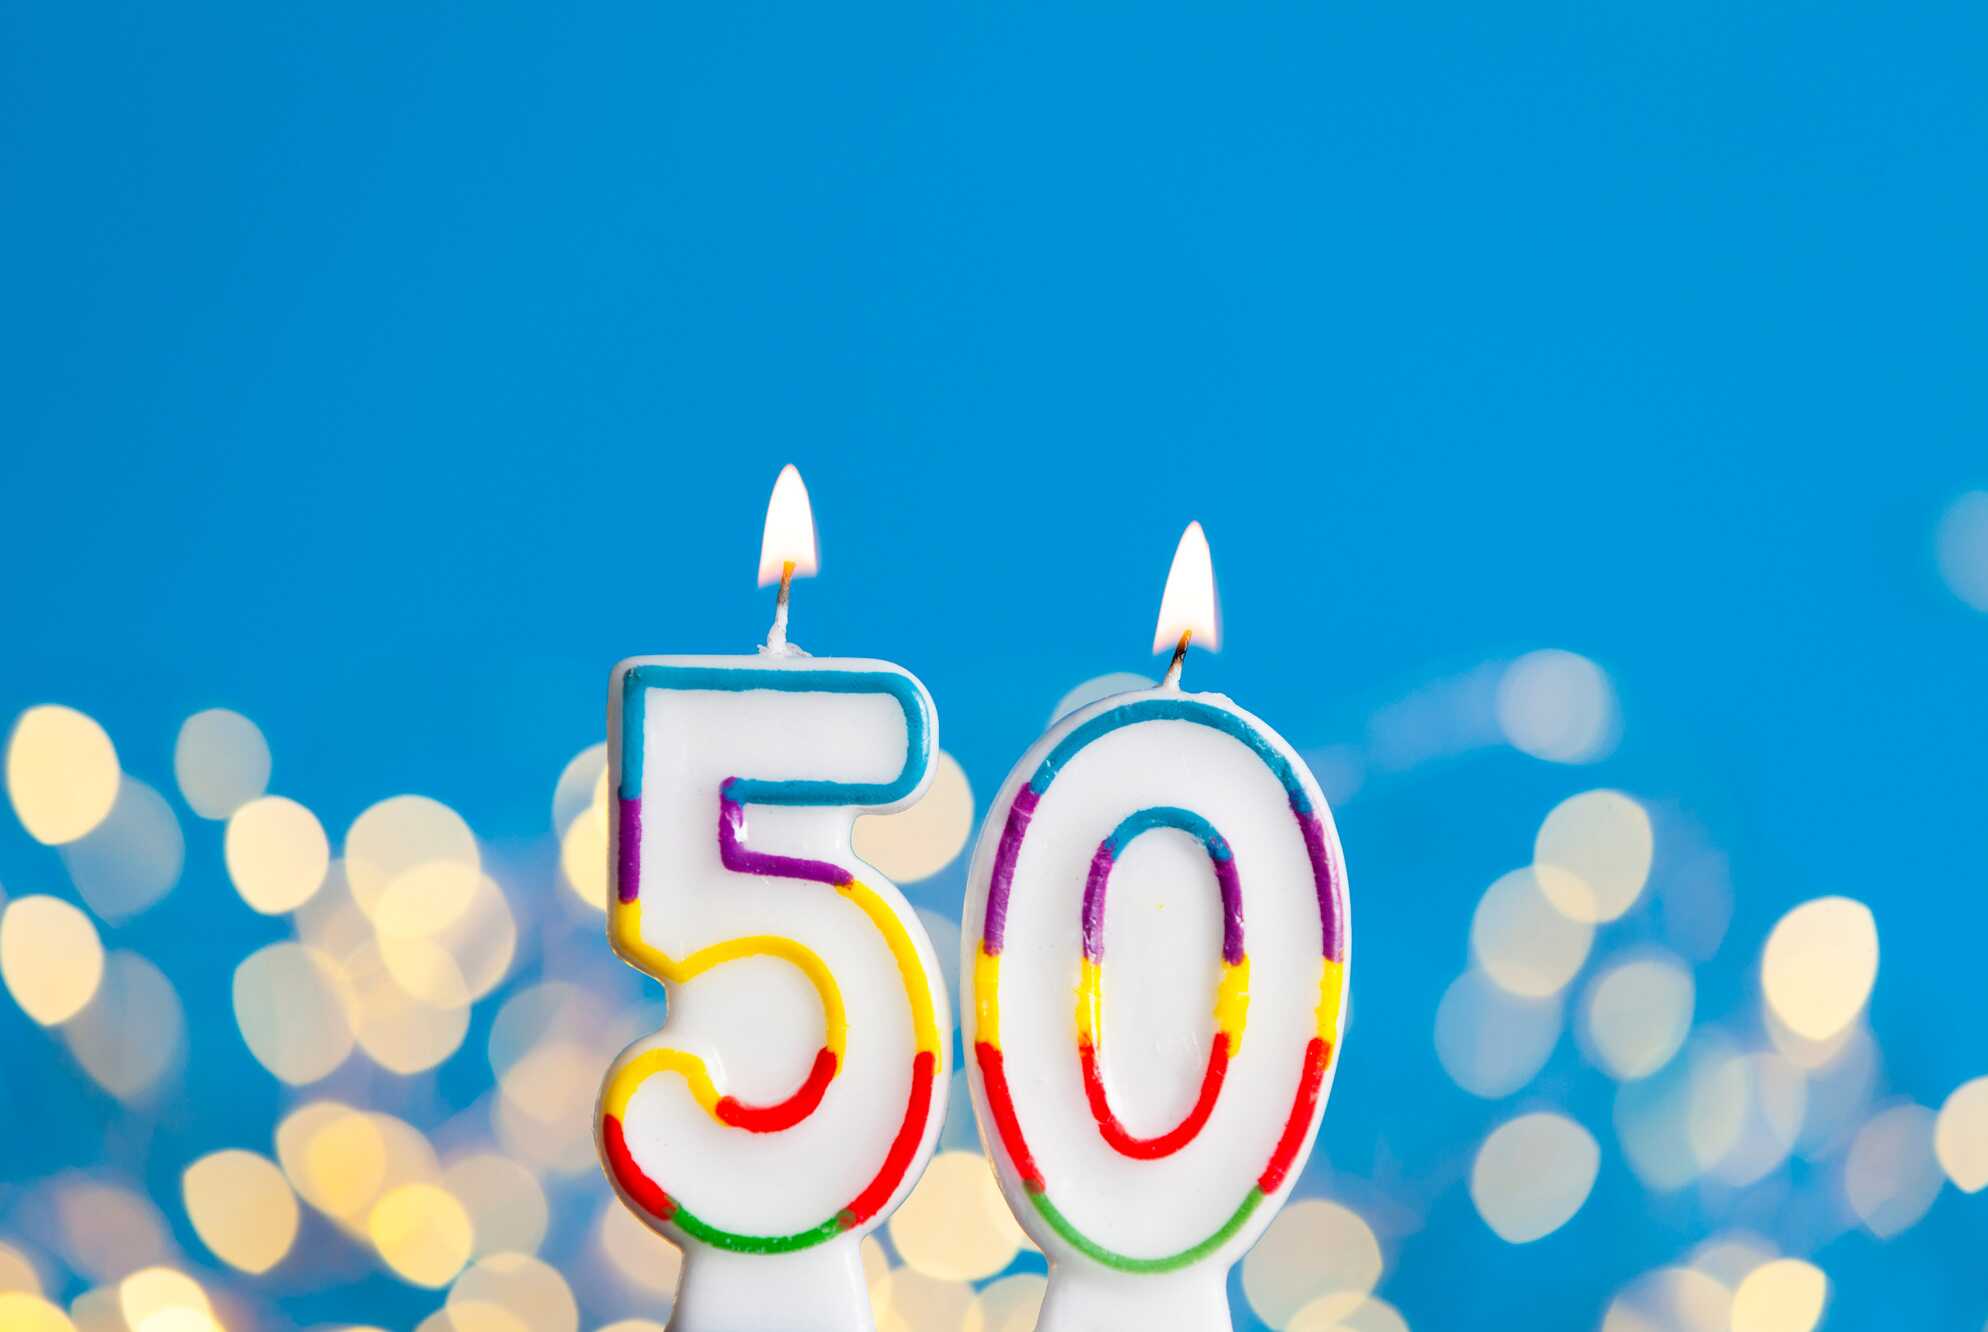 50th Birthday Gifts for Her, 50th Birthday Decorations for Her, 50th  Birthday Gift Ideas, Happy 50th Birthday Gifts, Best Gifts for 50 Year Old  Wife